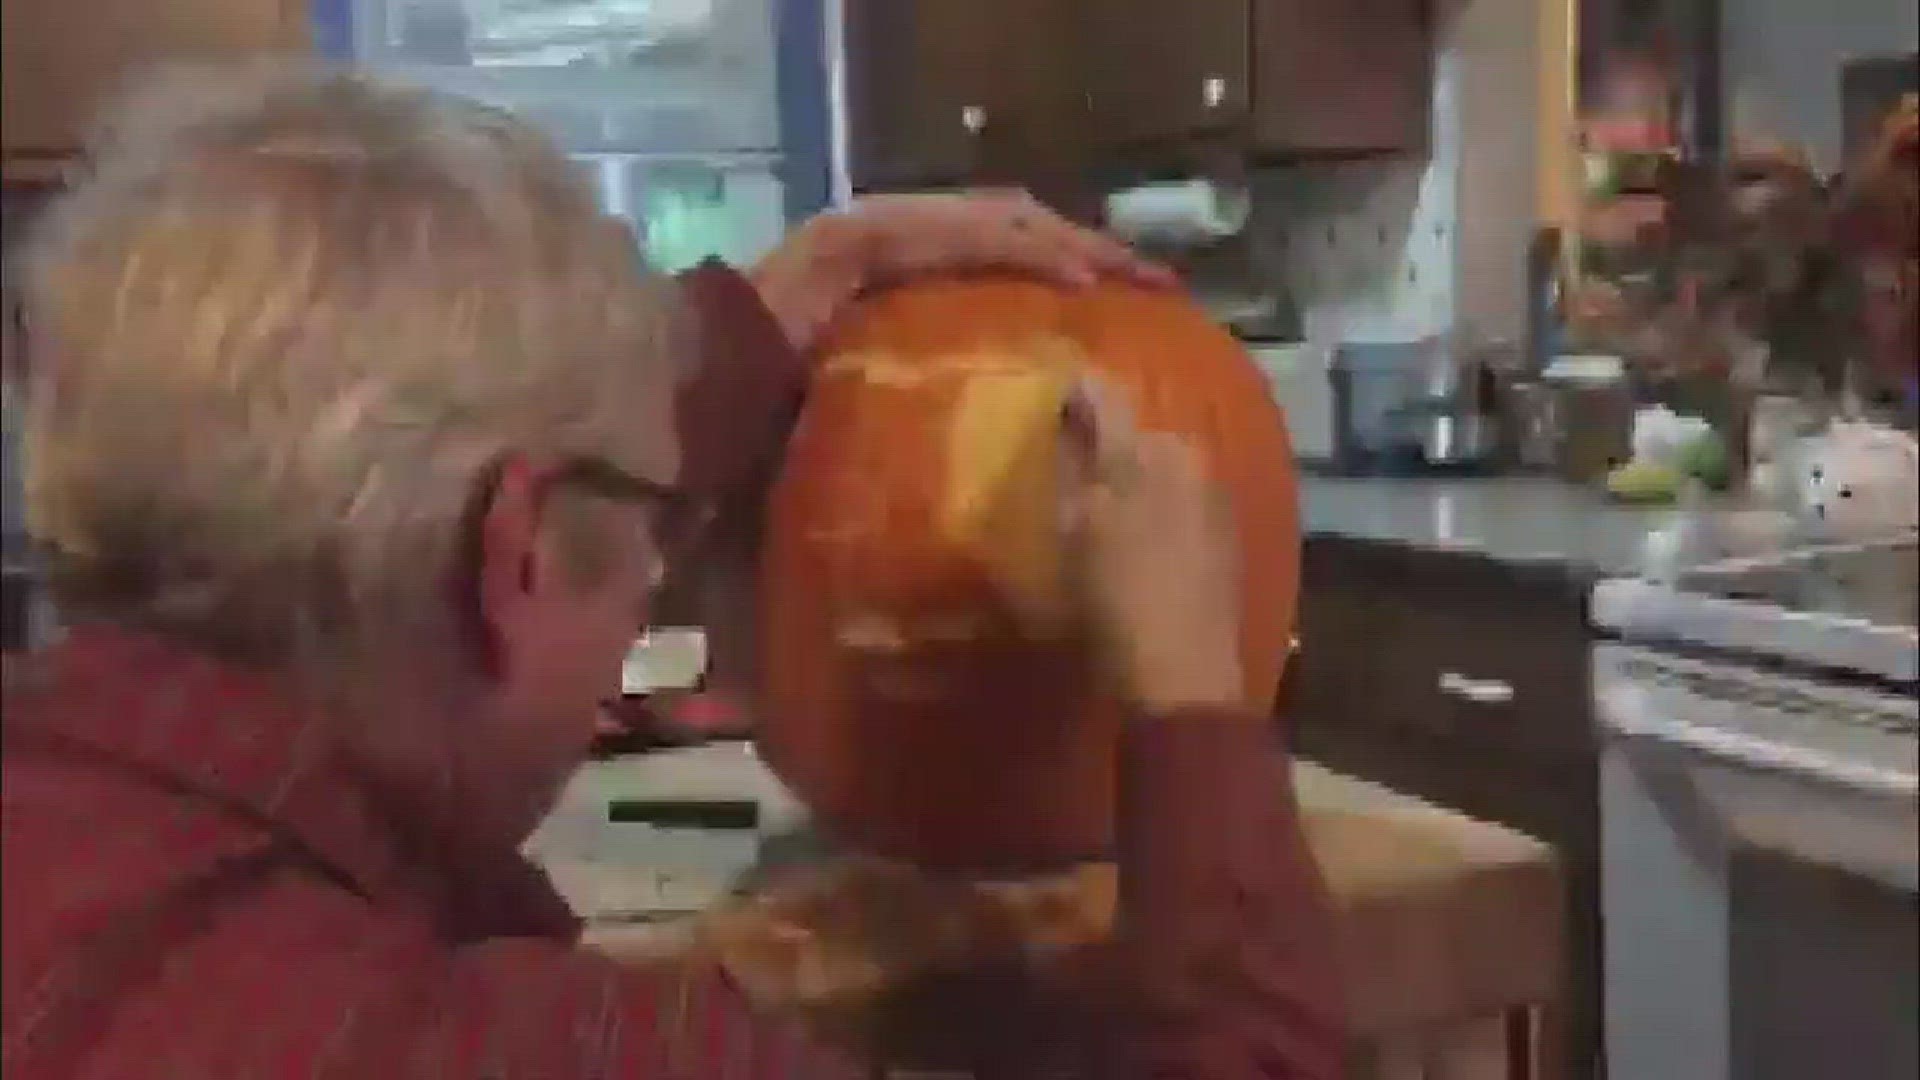 Check this out! Dr. David Bowe carved an incredible Halloween pumpkin to look just like WKYC's Jim Donovan. Totally sweet!